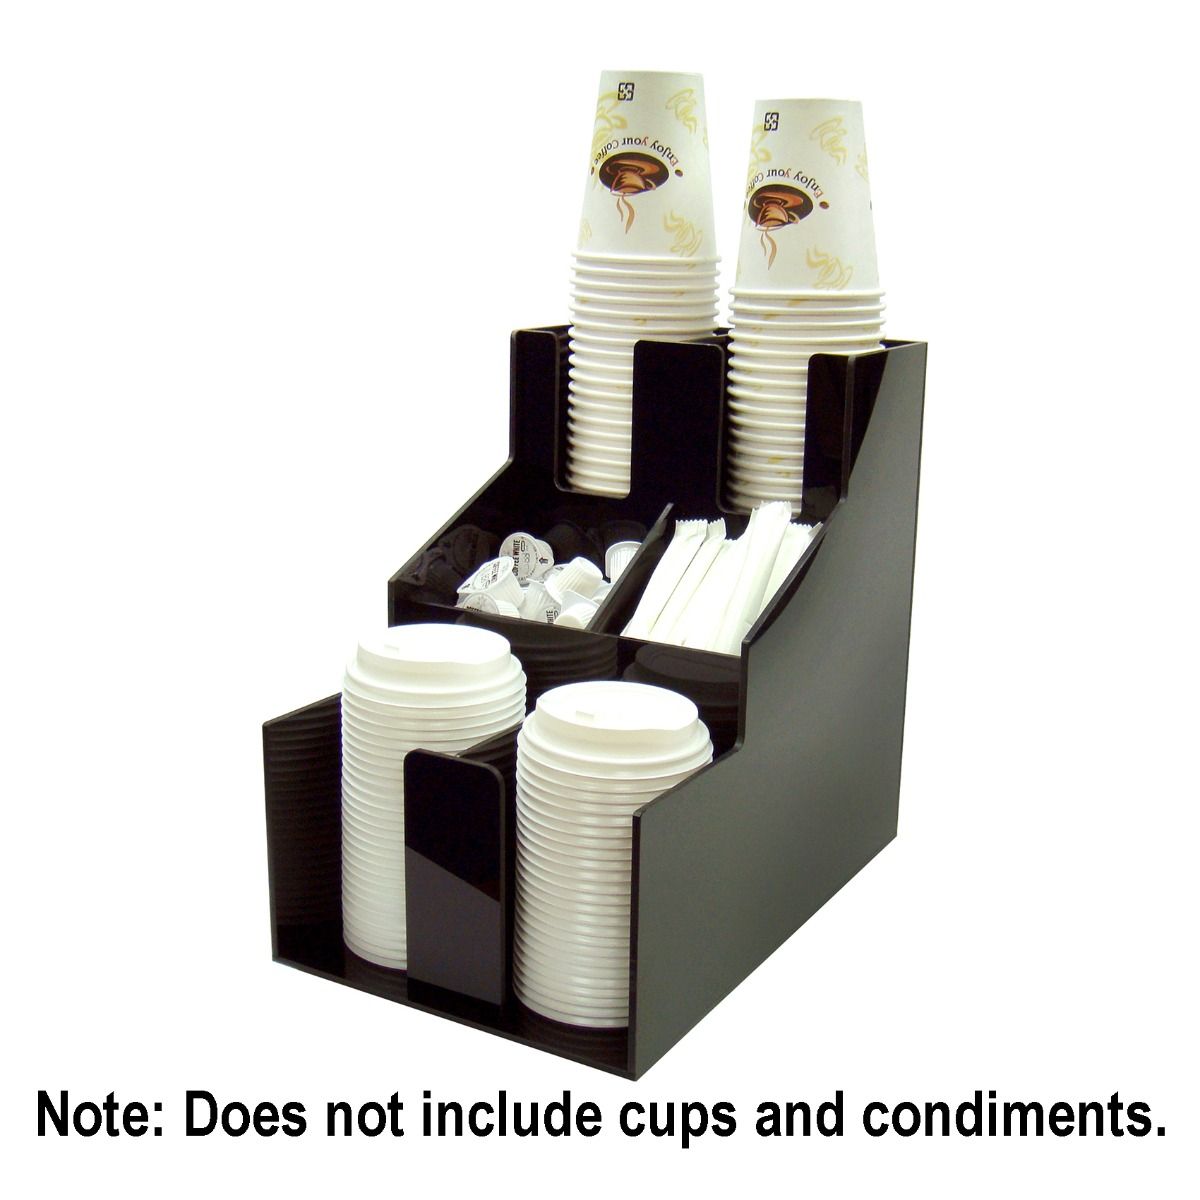 2 Stacks 3 Tiers Cup and Lid Organizer Winco CLSO-2T 